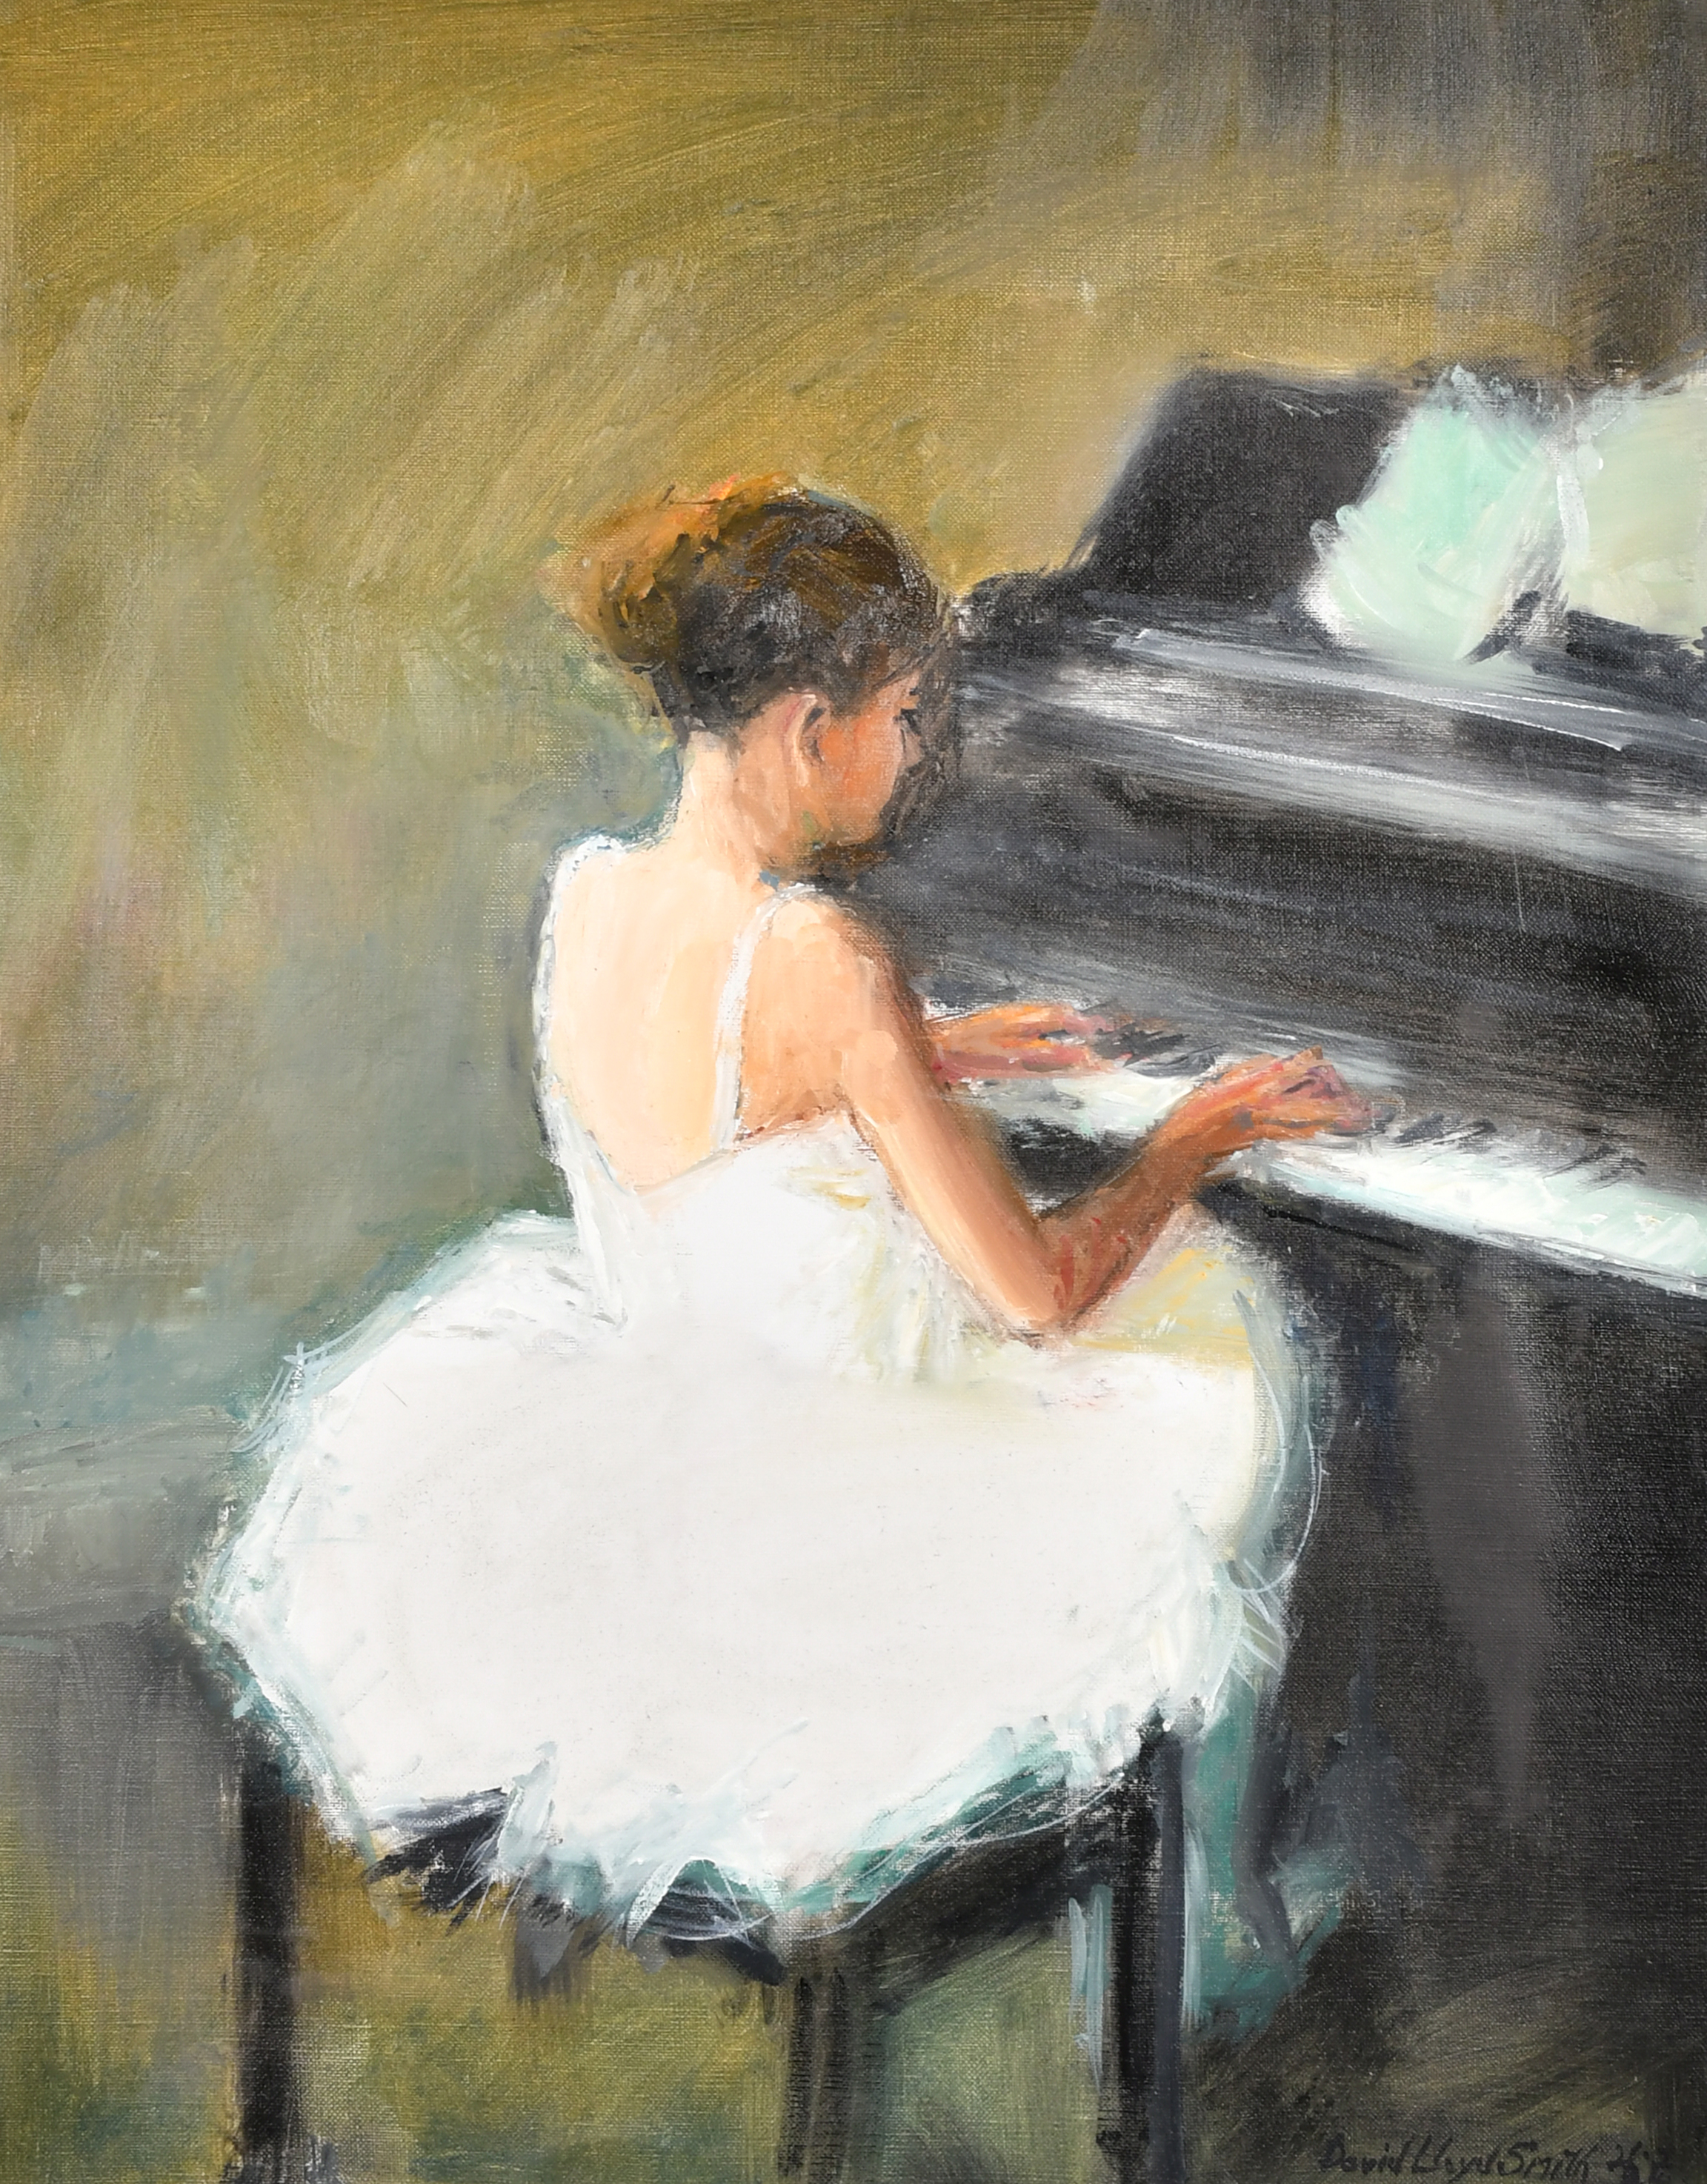 David Lloyd Smith (1944-) British. A Ballerina at a Piano, Oil on canvas, Signed and dated, 20" x